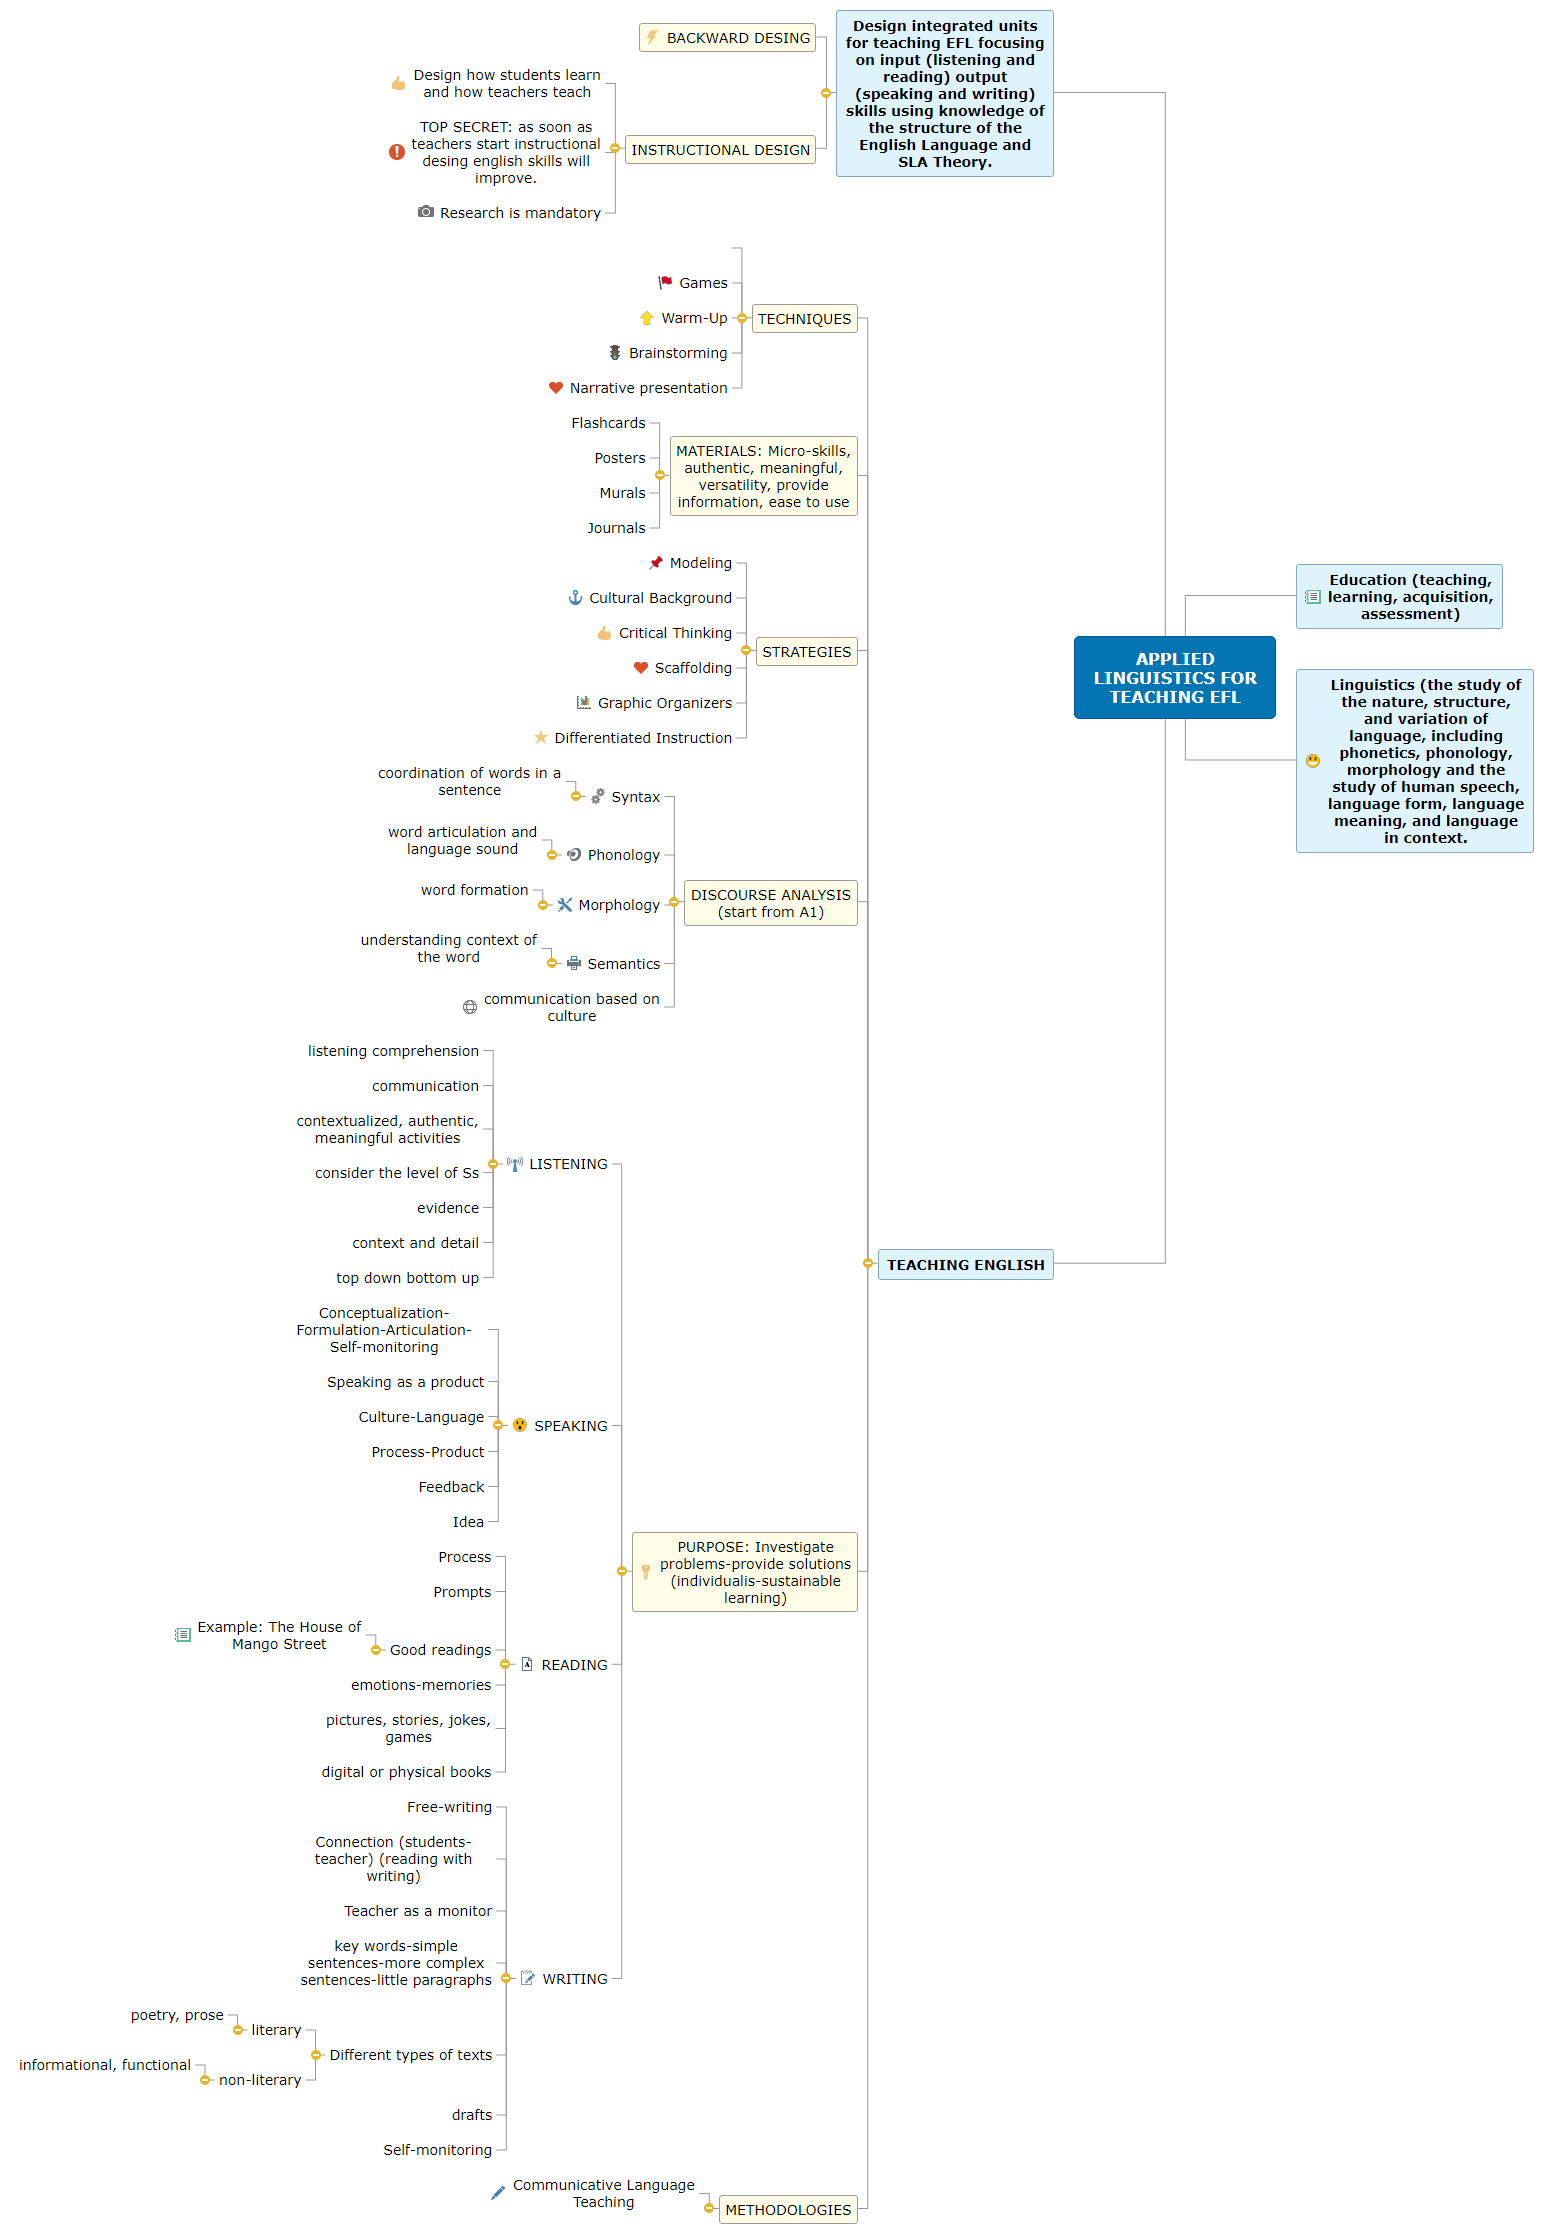 APPLIED LINGUISTICS FOR TEACHING EFL Mind Map